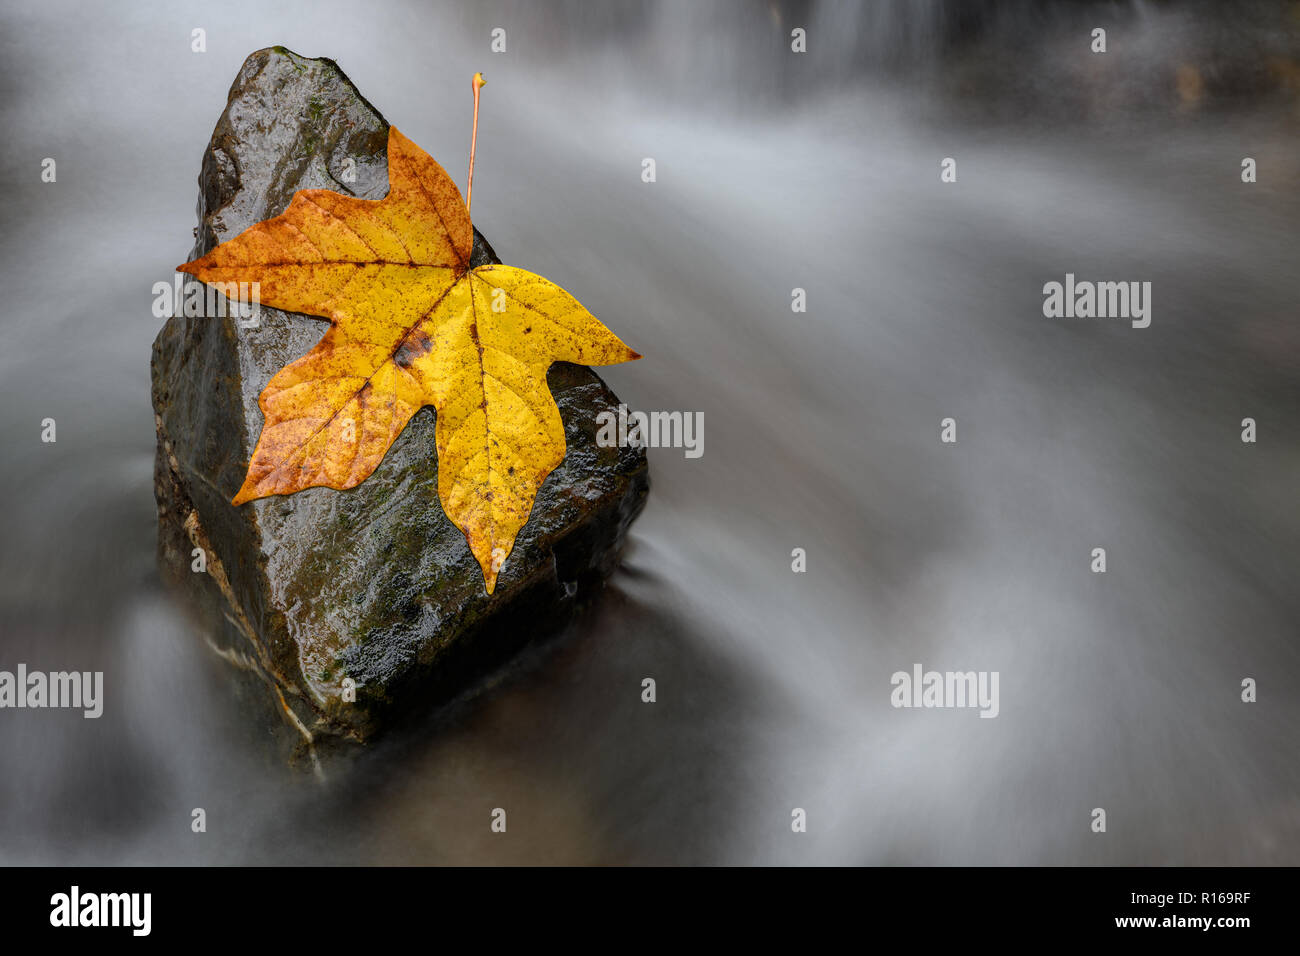 Stronger together or nothing is impossible concept. A steady rock helps a single fall leaf stand against the backwash. Stock Photo